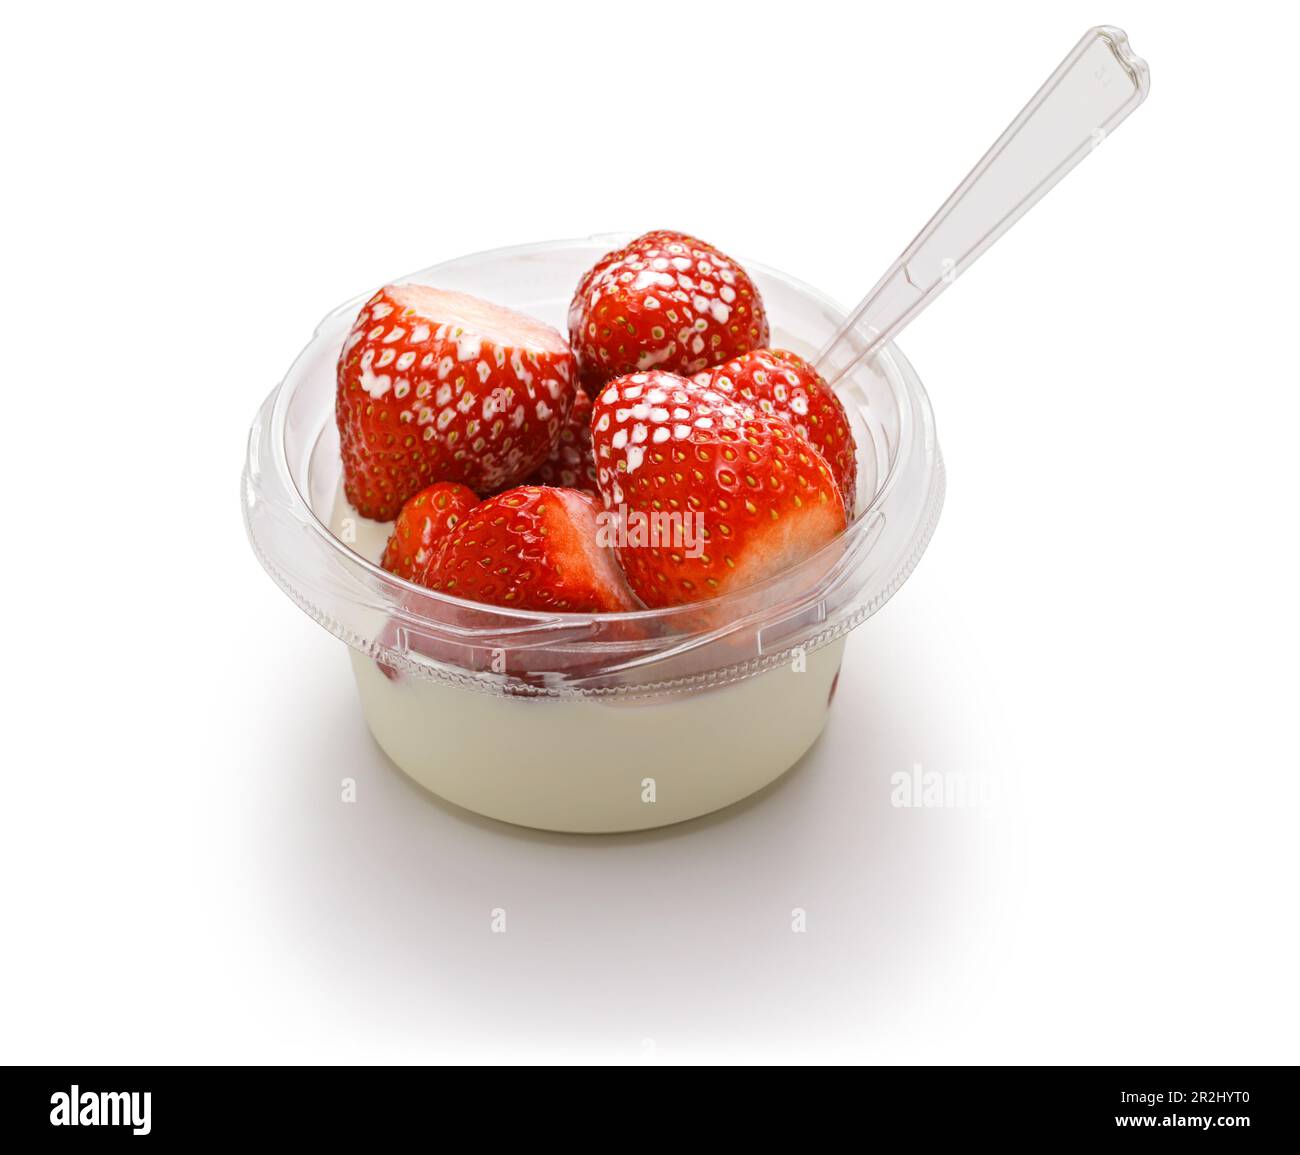 strawberries and cream, a small bowl, English summer specialty Stock Photo